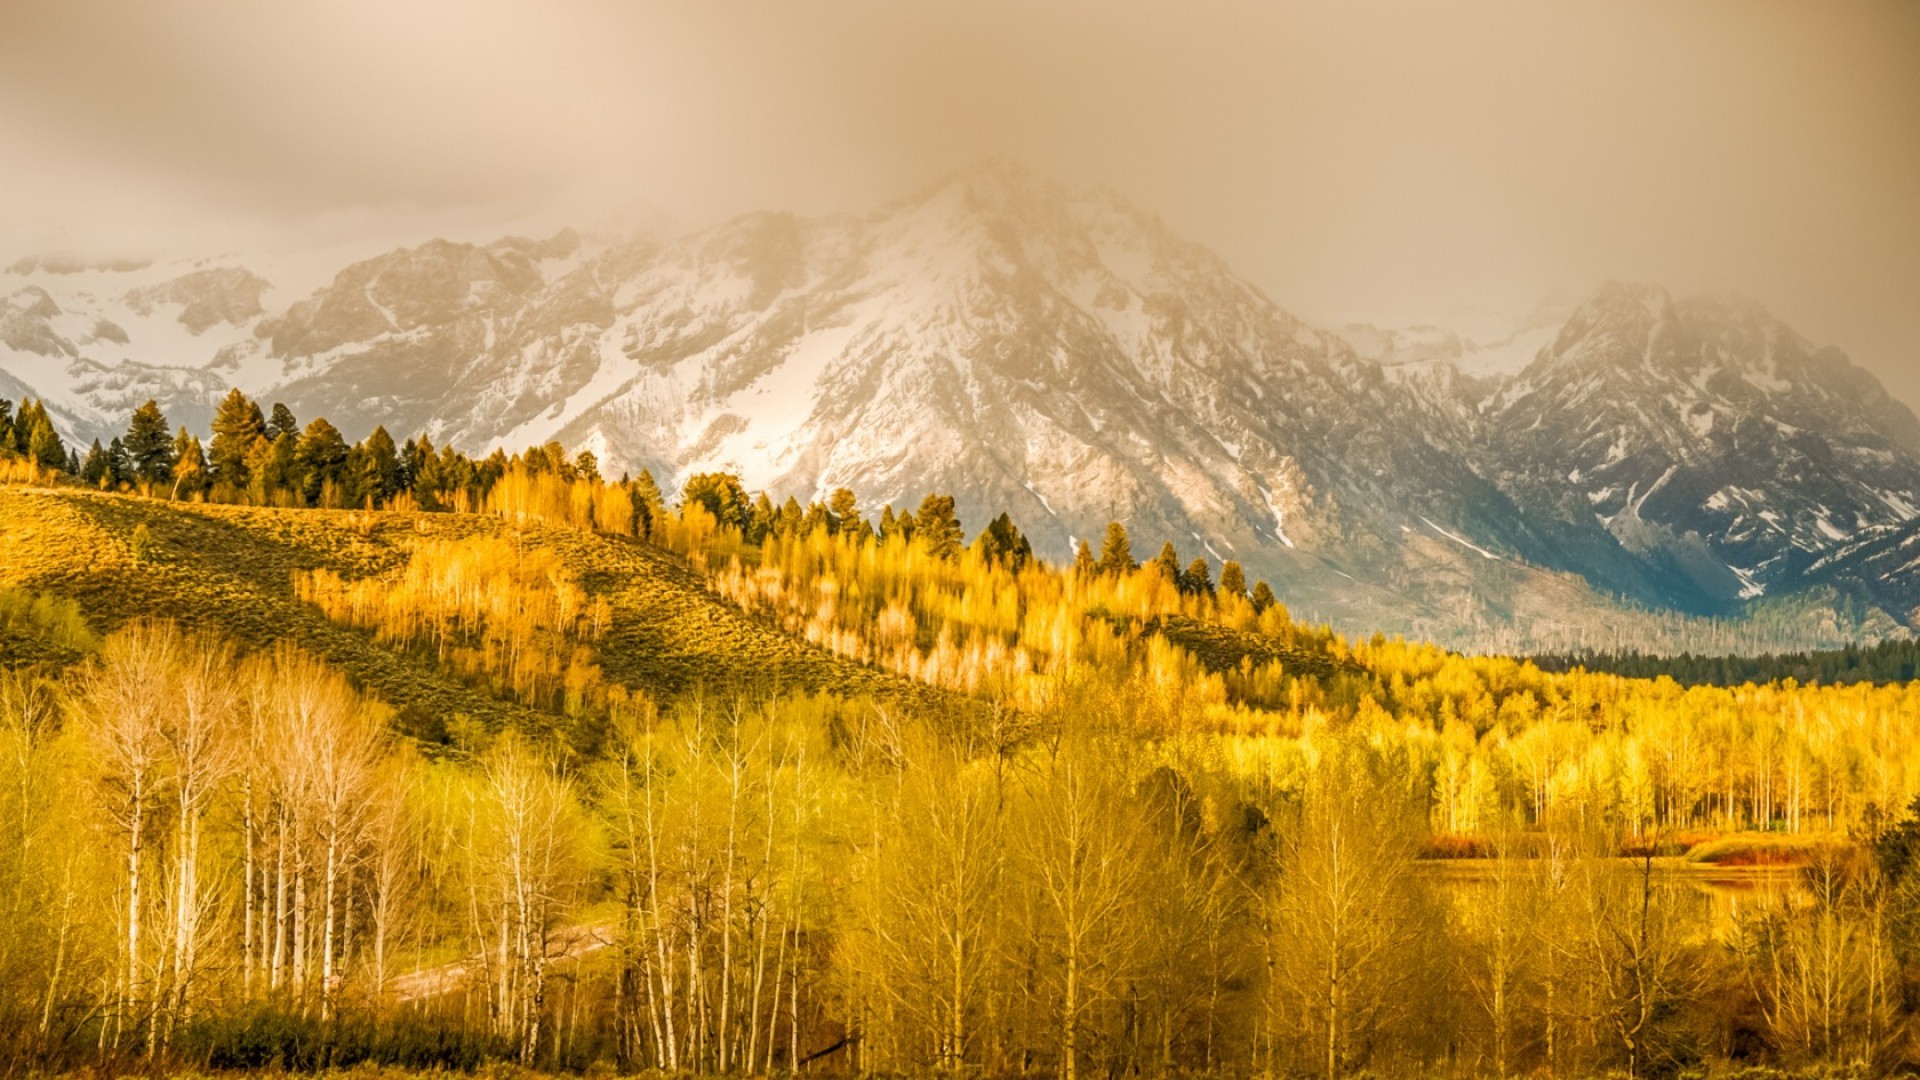 nature, Landscape, Mountain, Clouds, Trees, Forest, Hill, Grass, Wyoming, USA, Fall, Mist, Snowy Peak, Birch Wallpaper